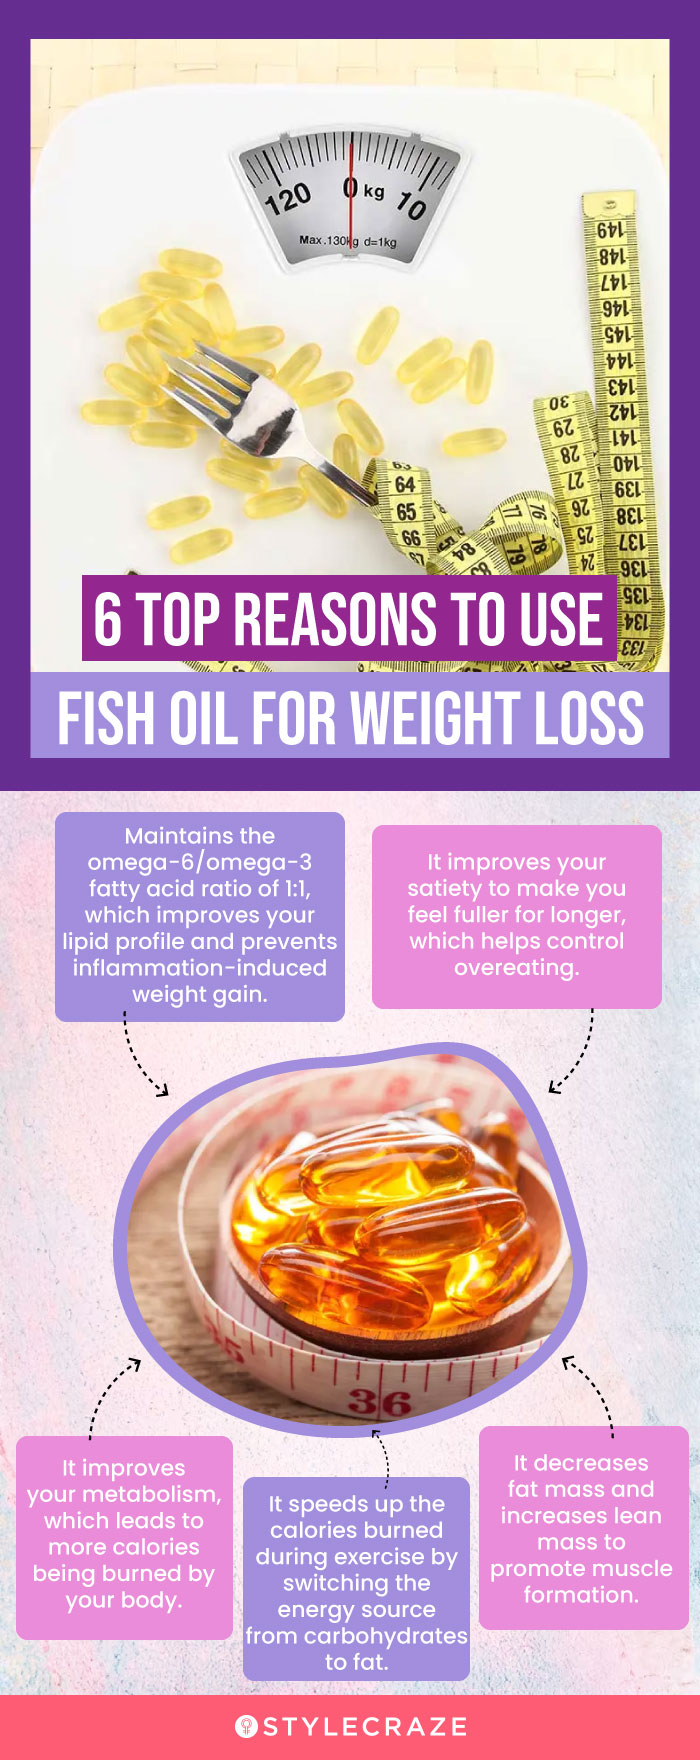 6 top reasons to use fish oil for weight loss (infographic)